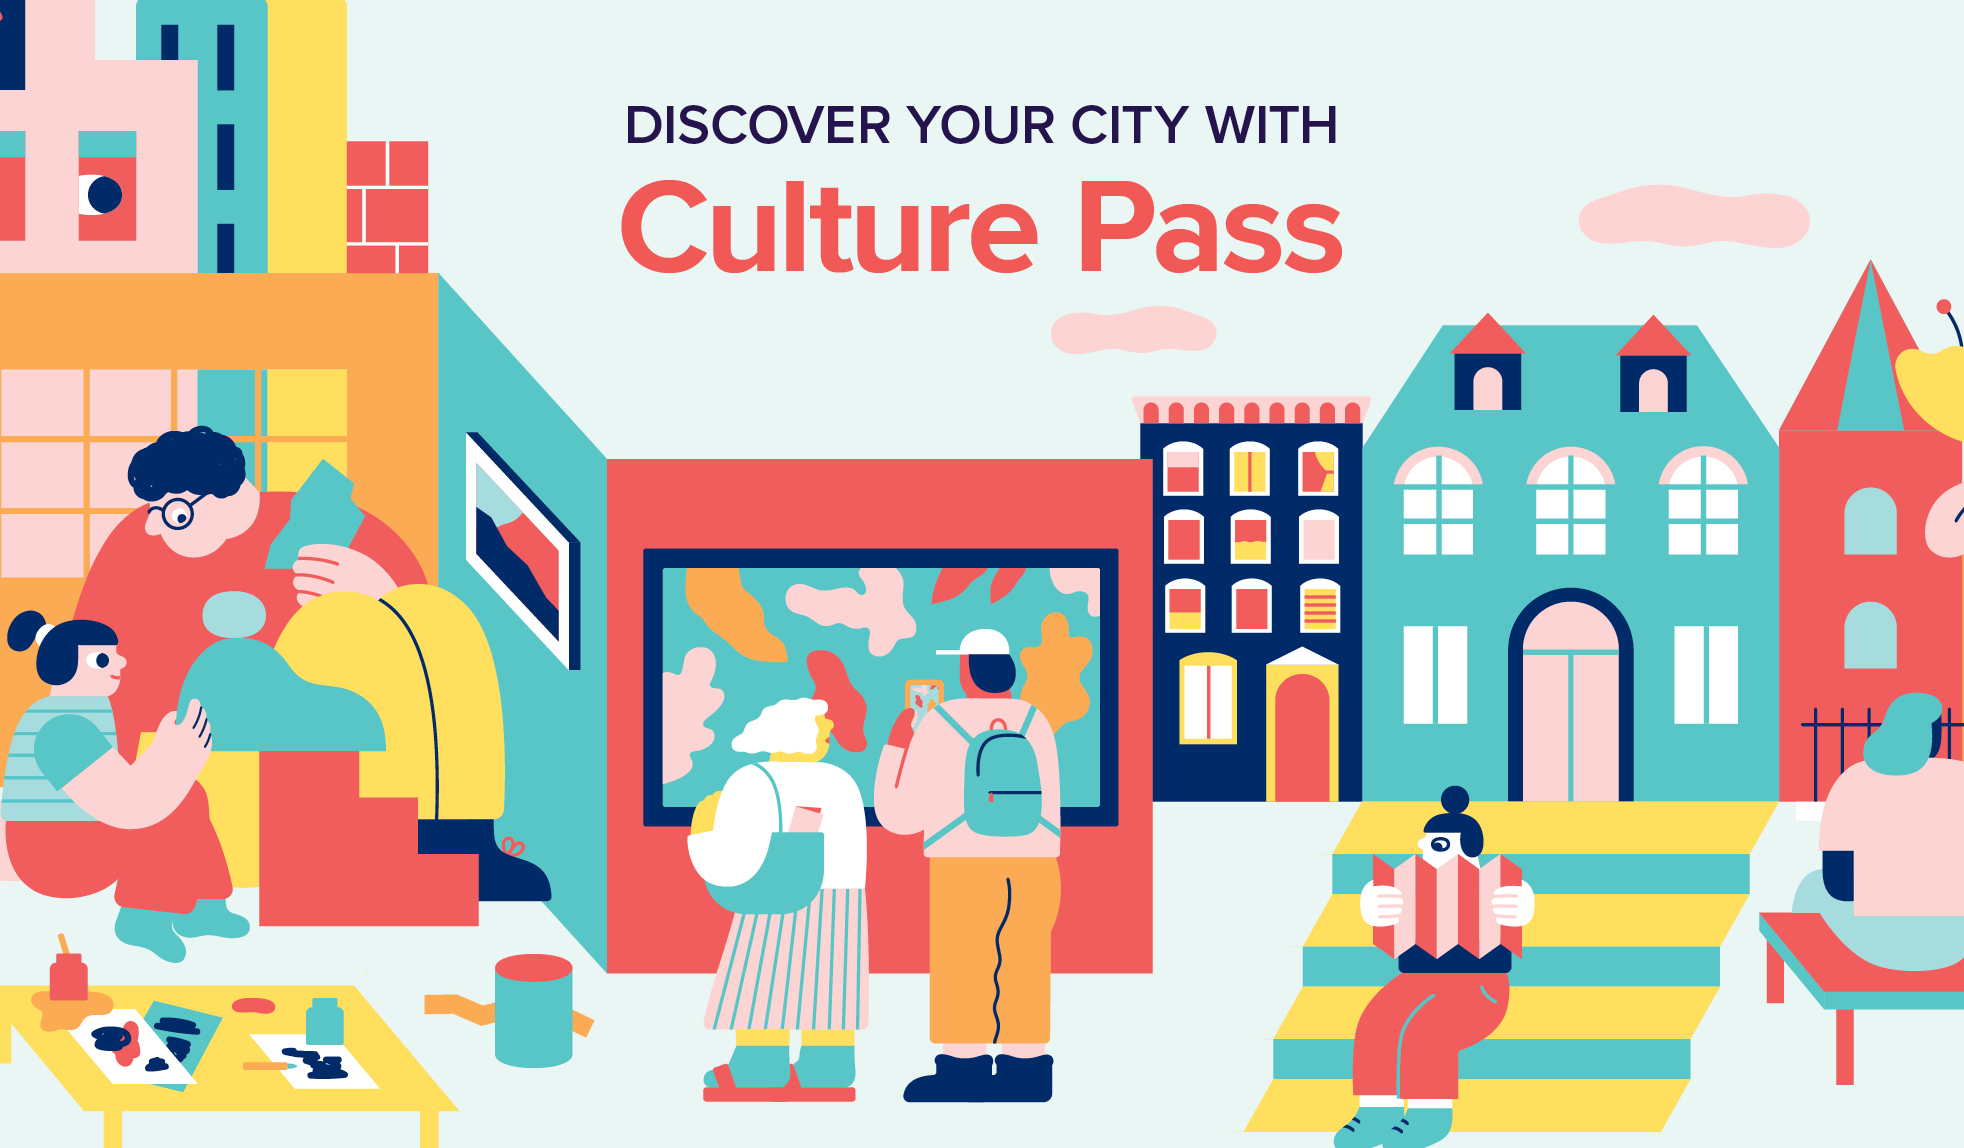 Use your library card to get a free pass to NYC's culture!